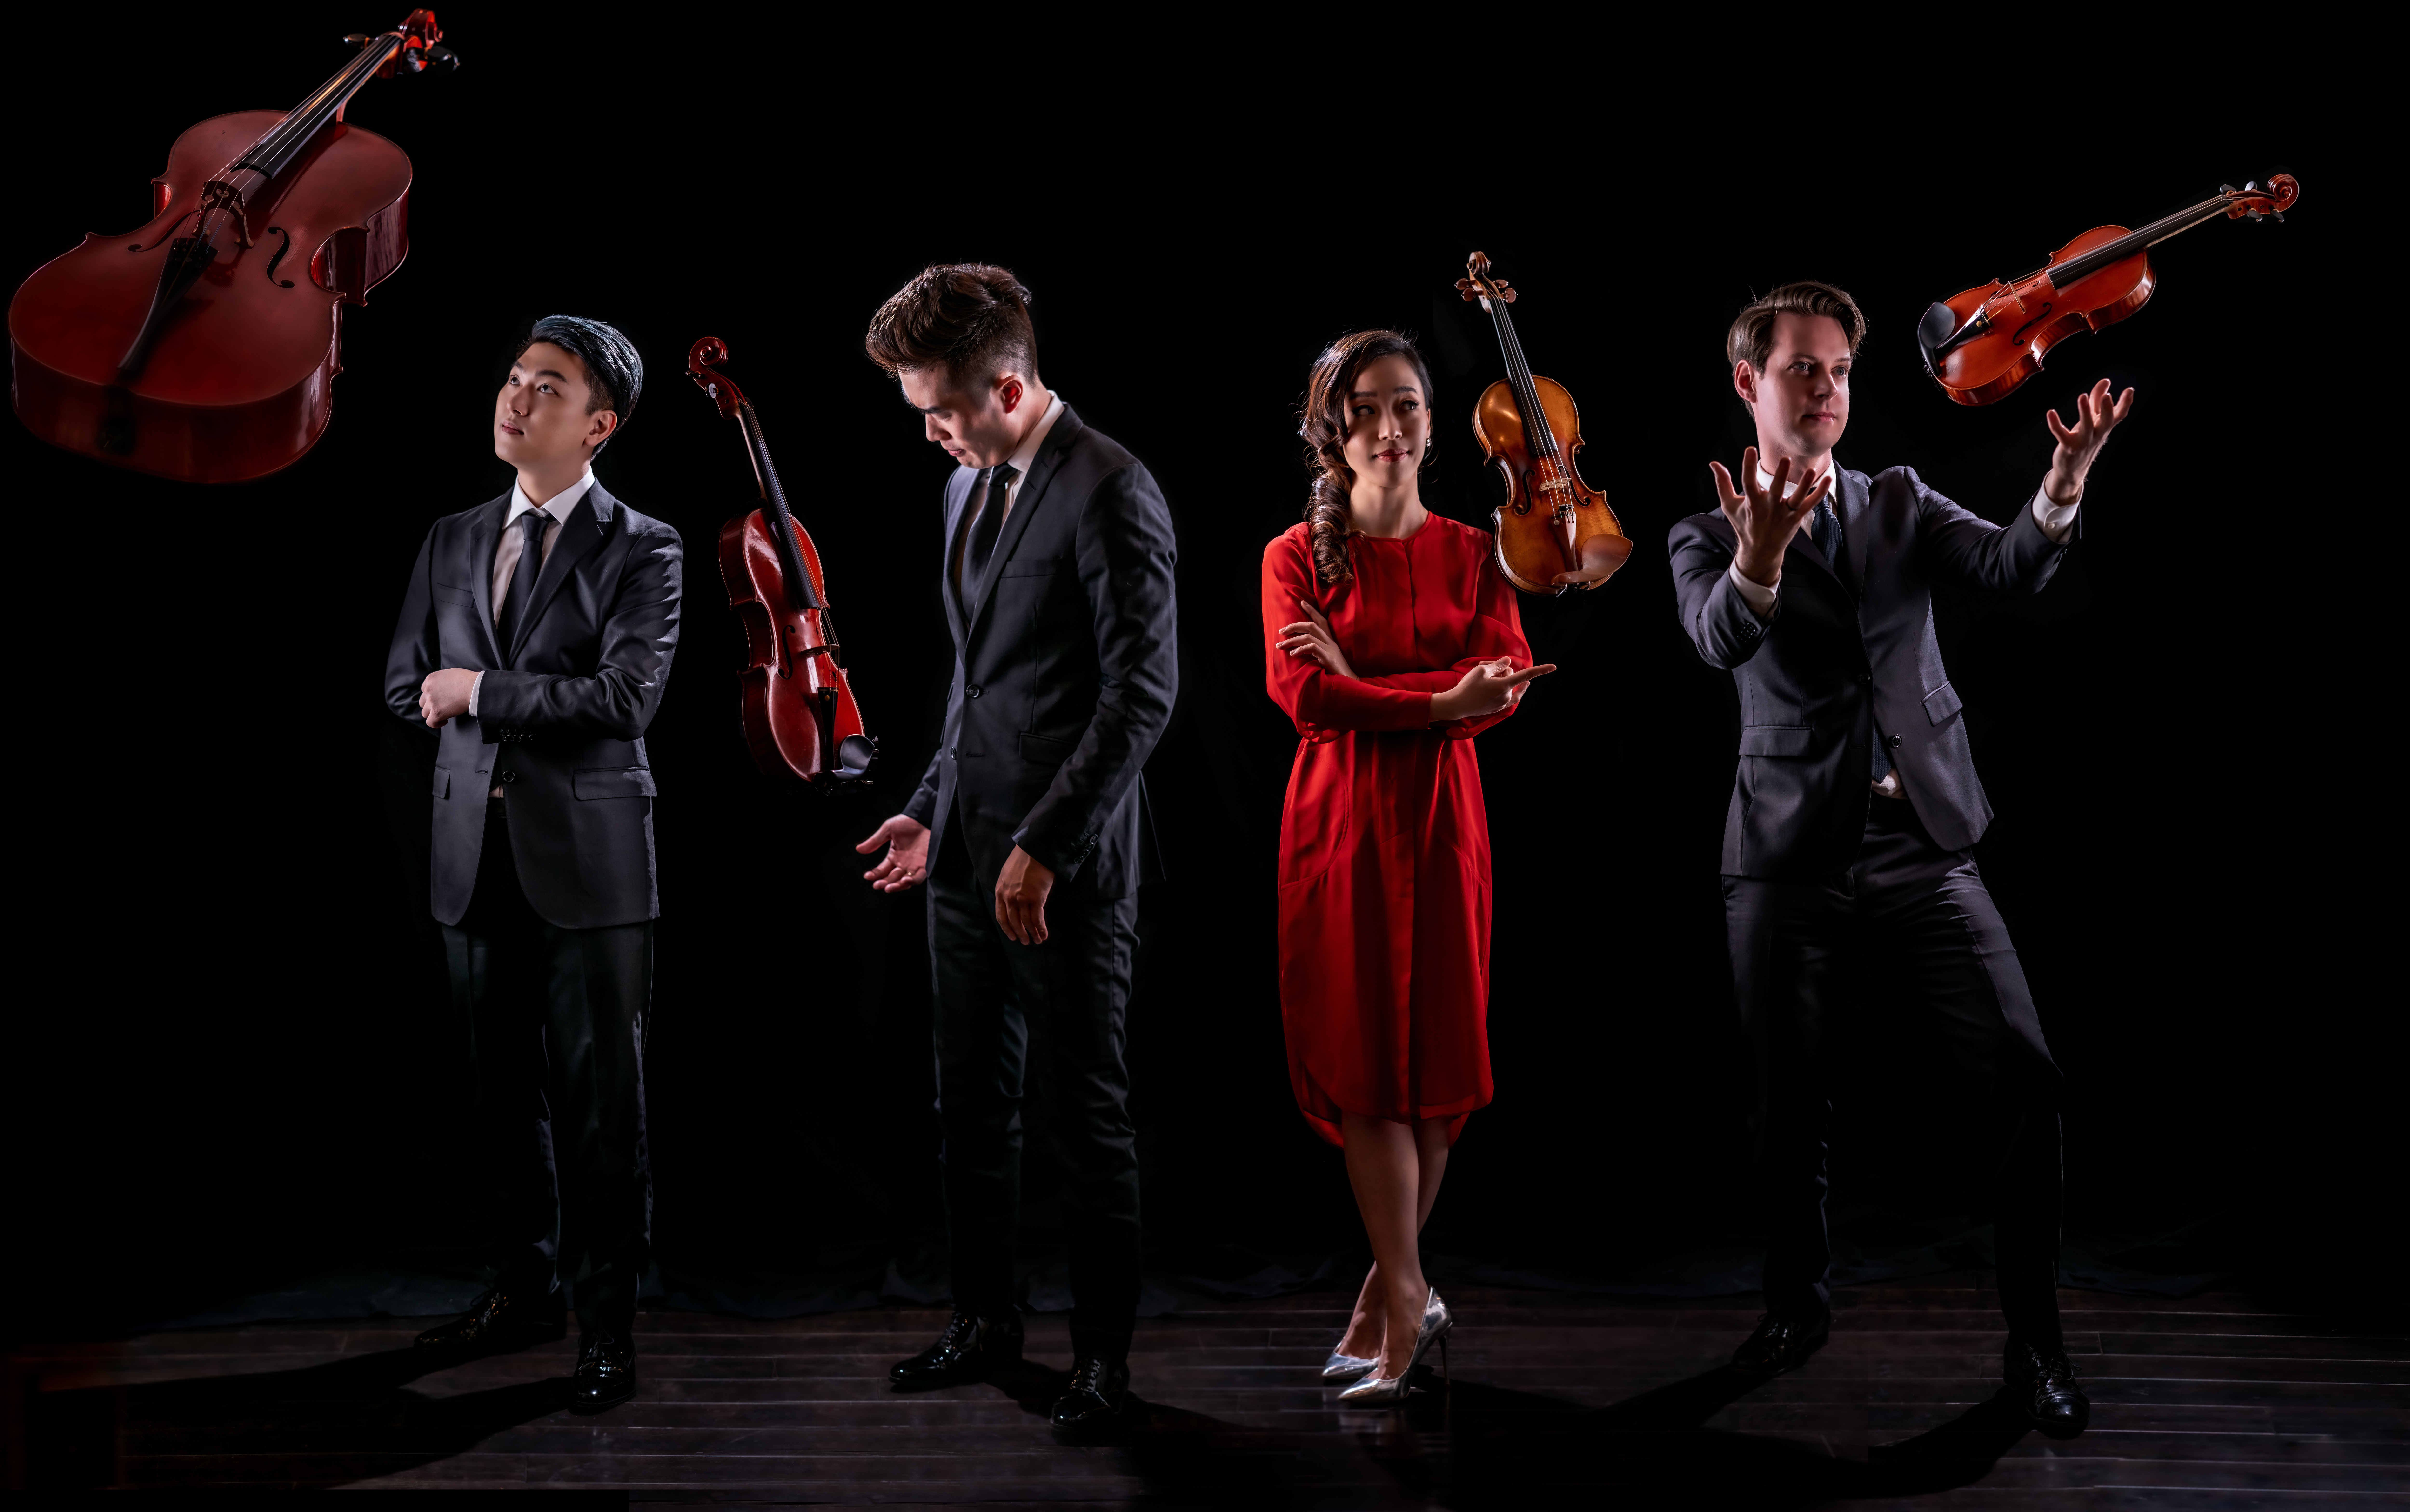 VC INTERVIEW | VC Artist Rolston String Quartet Gives Their Expert Advice for Young Ensembles